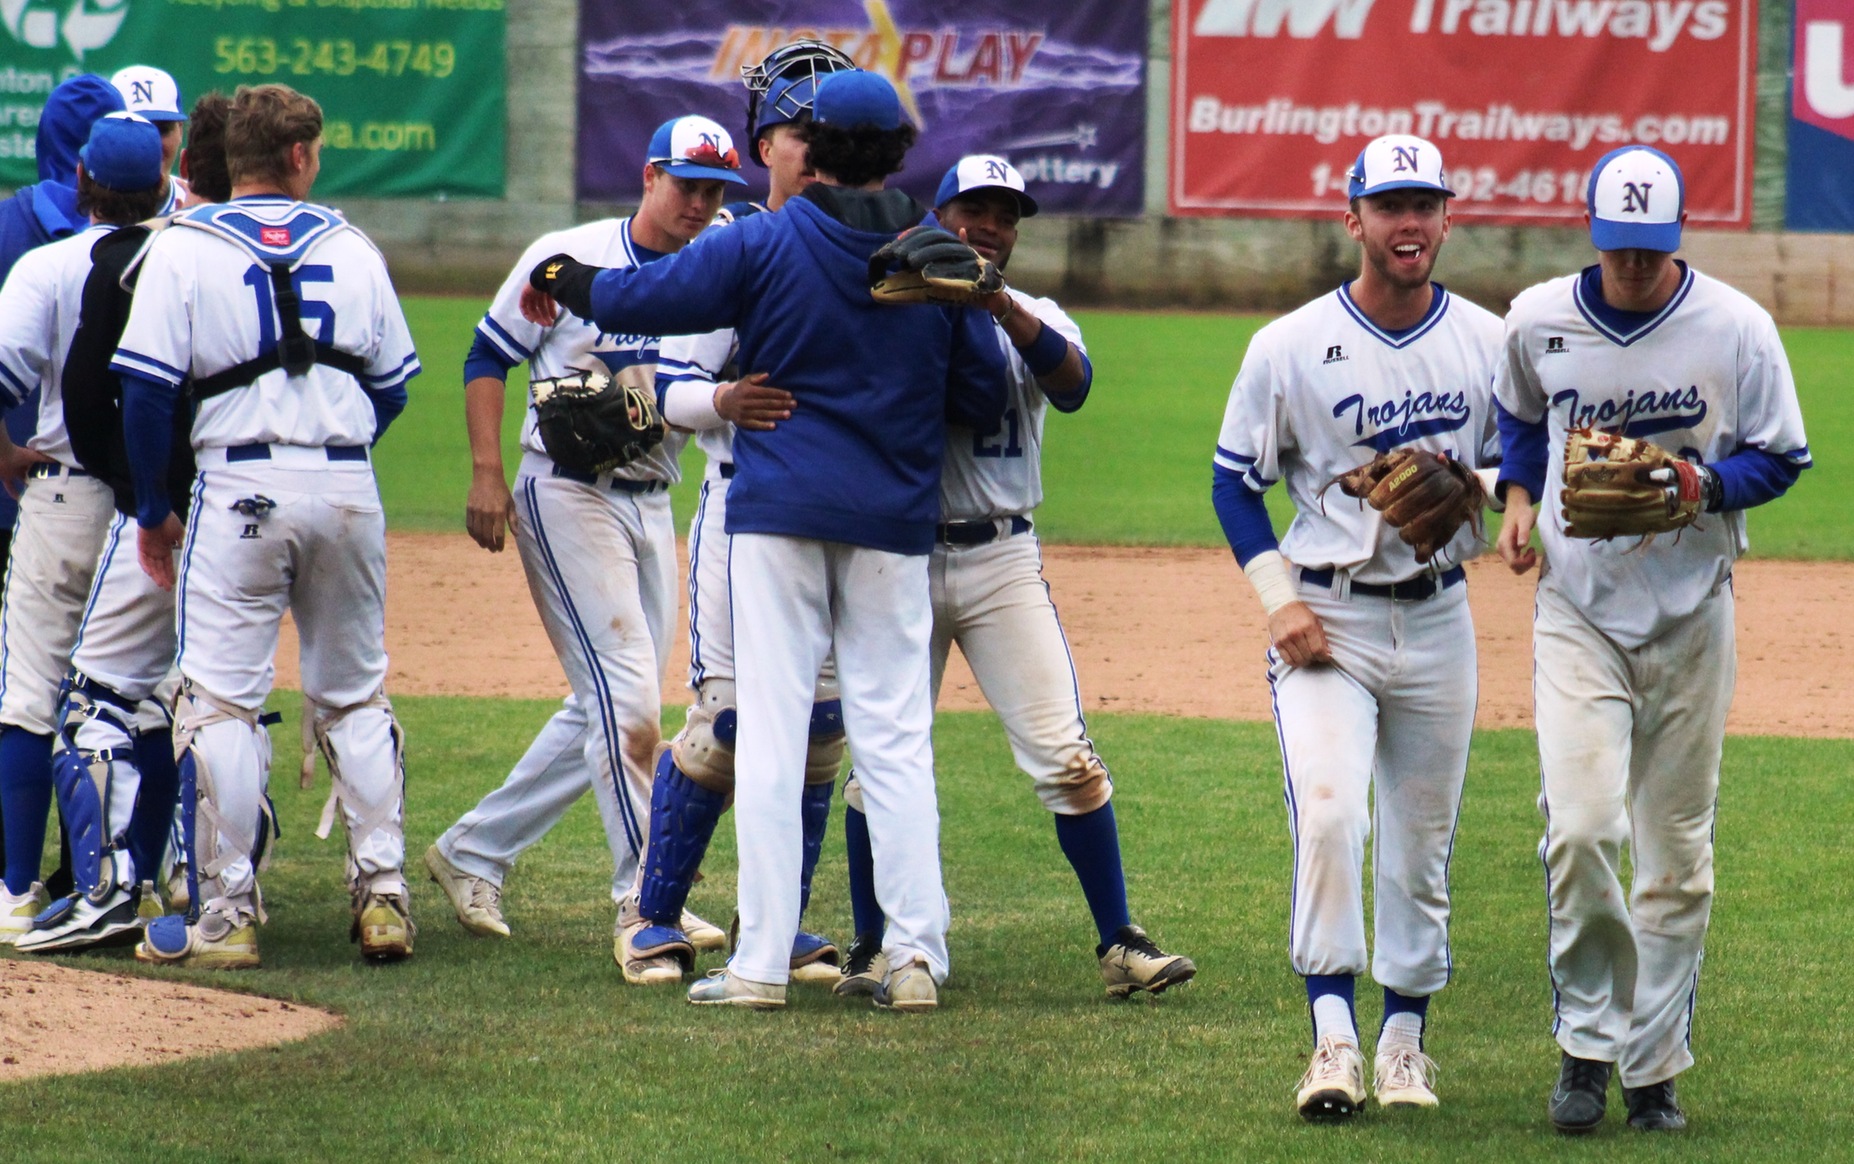 The NIACC baseball team received the 2018 American Baseball Coaches Association Team Academic Excellence Award.